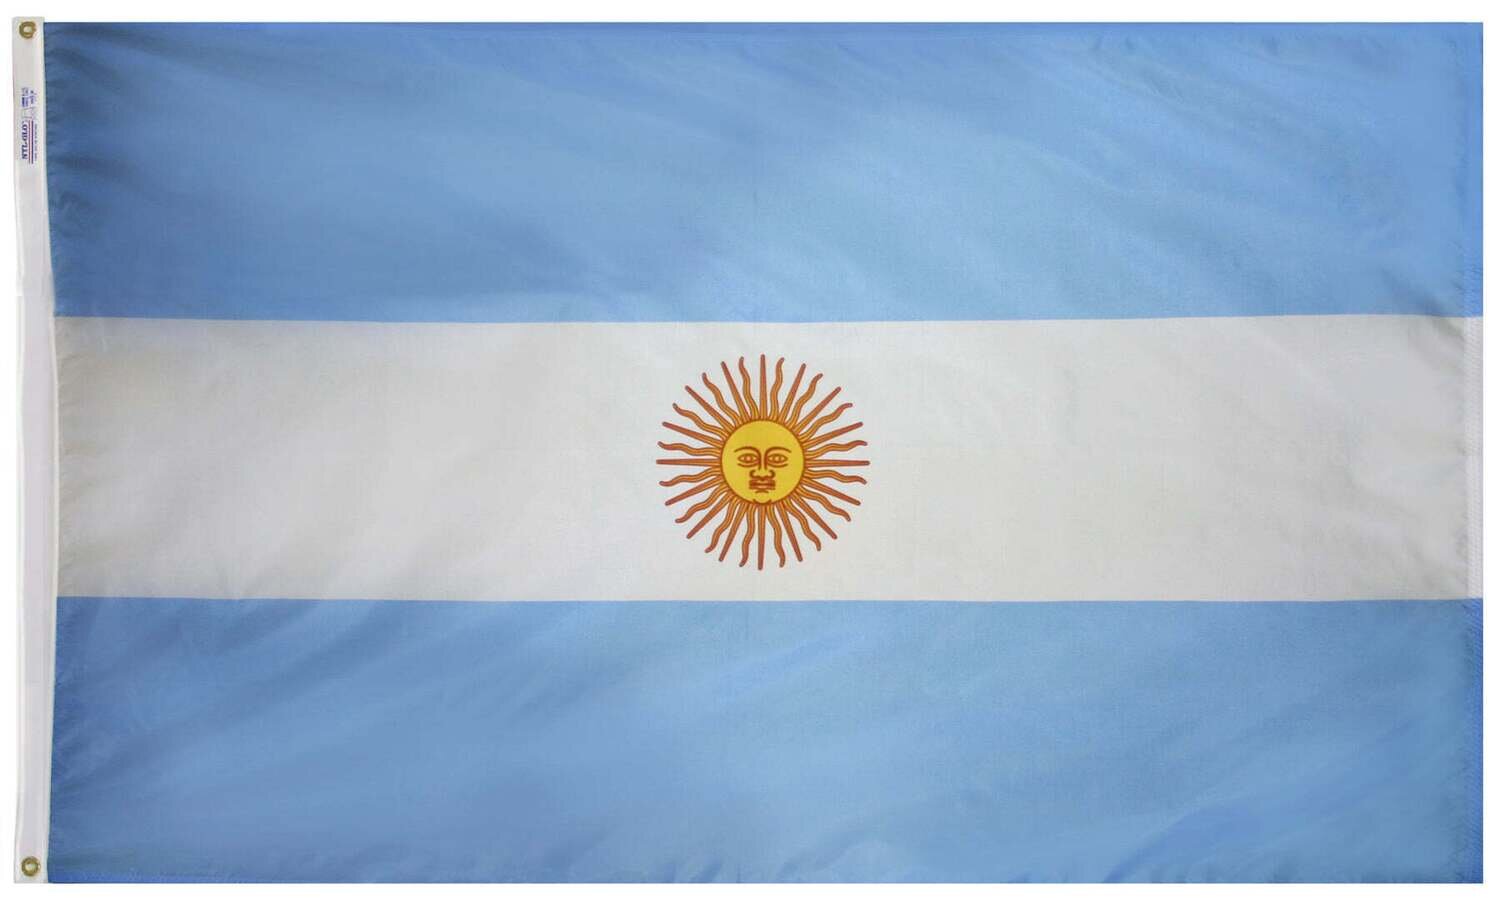 Argentina Flag 3x5 ft. Nylon SolarGuard Nyl-Glo 100% Made in USA to Official United Nations Design Specifications.